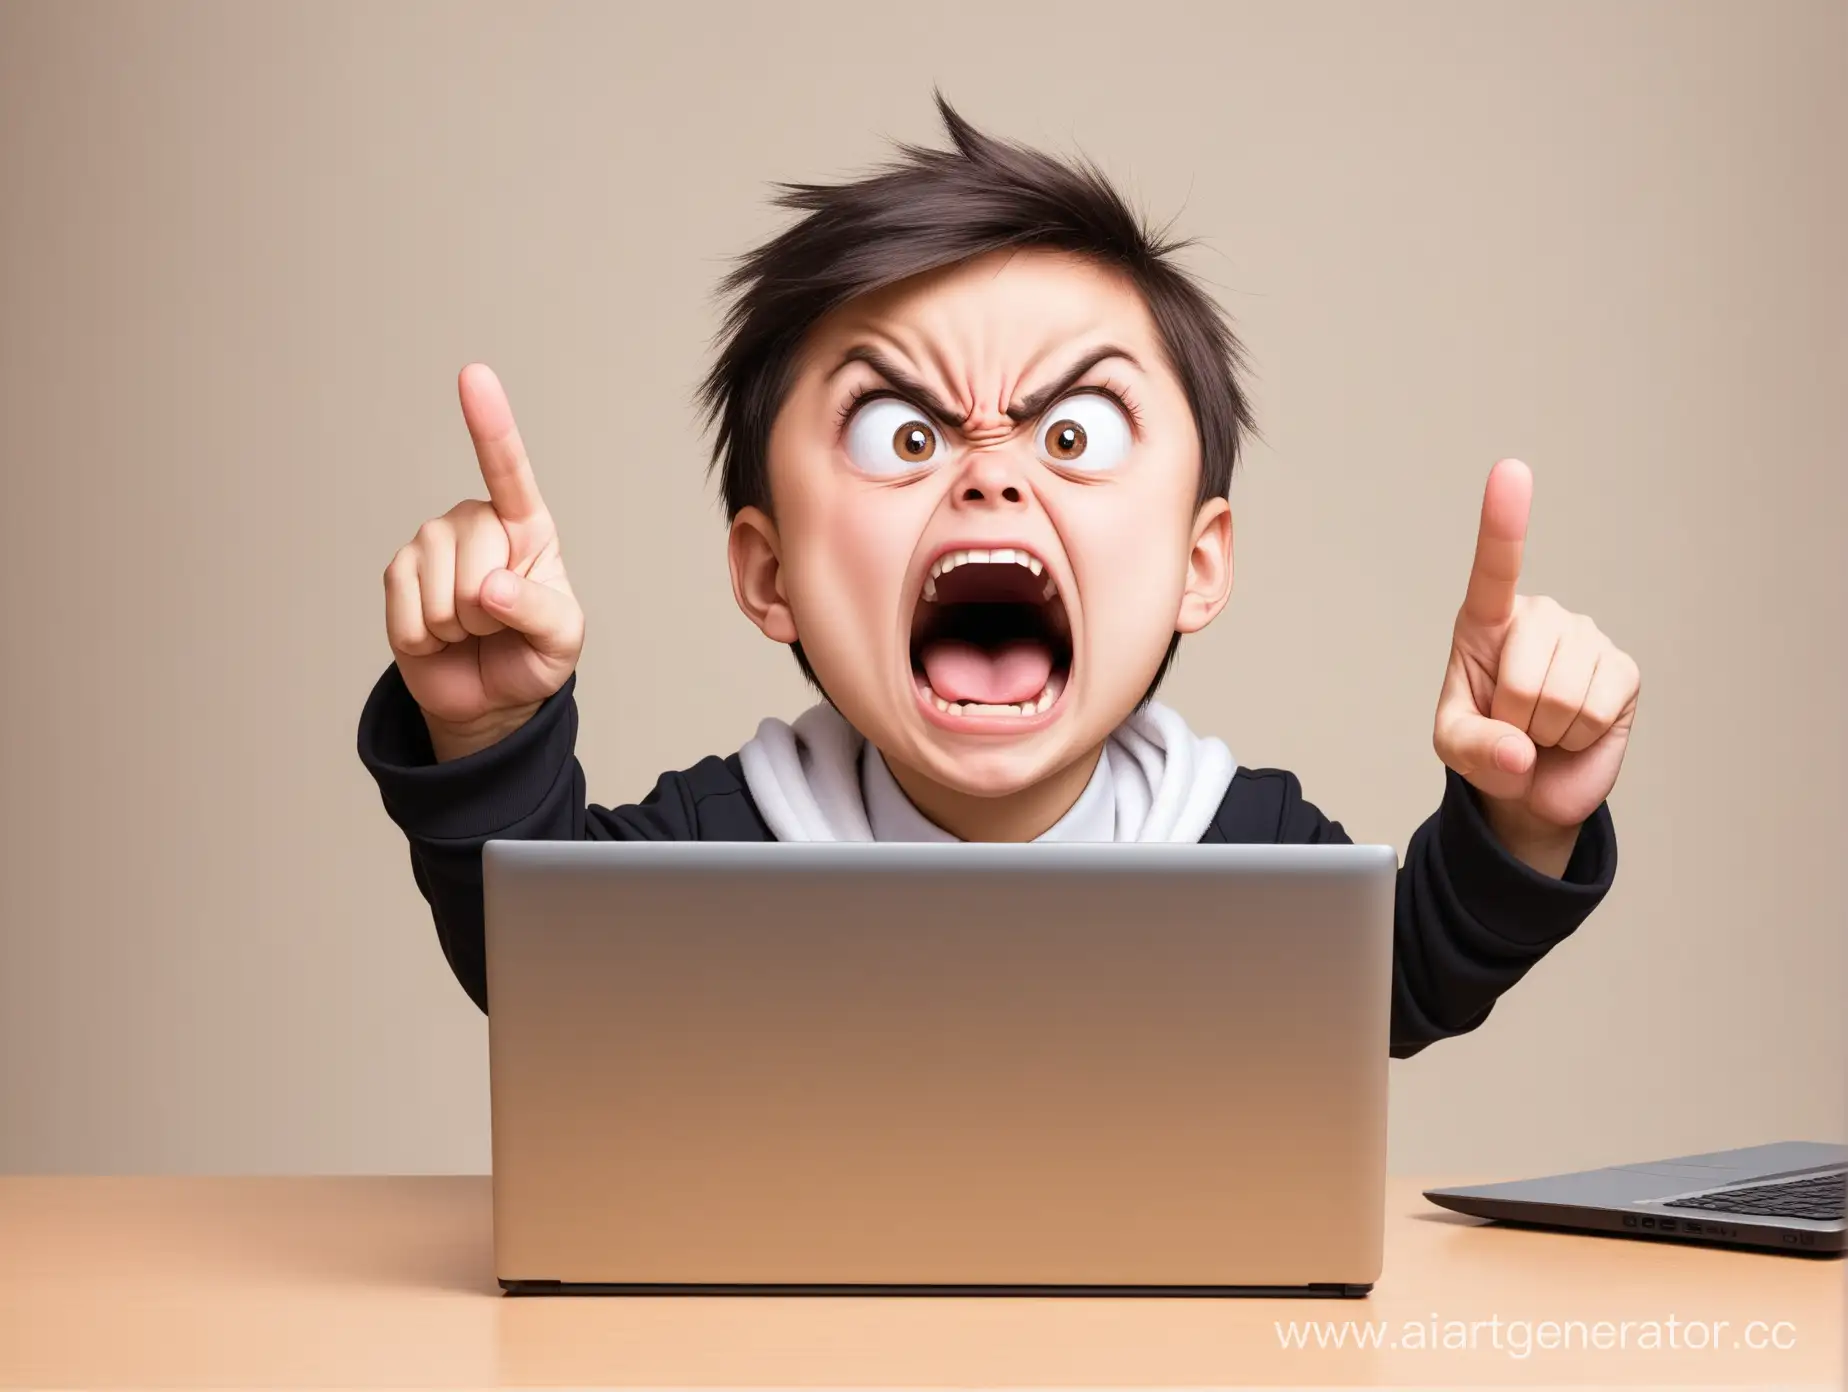 Angry-Person-Shouting-at-Laptop-in-Frustration